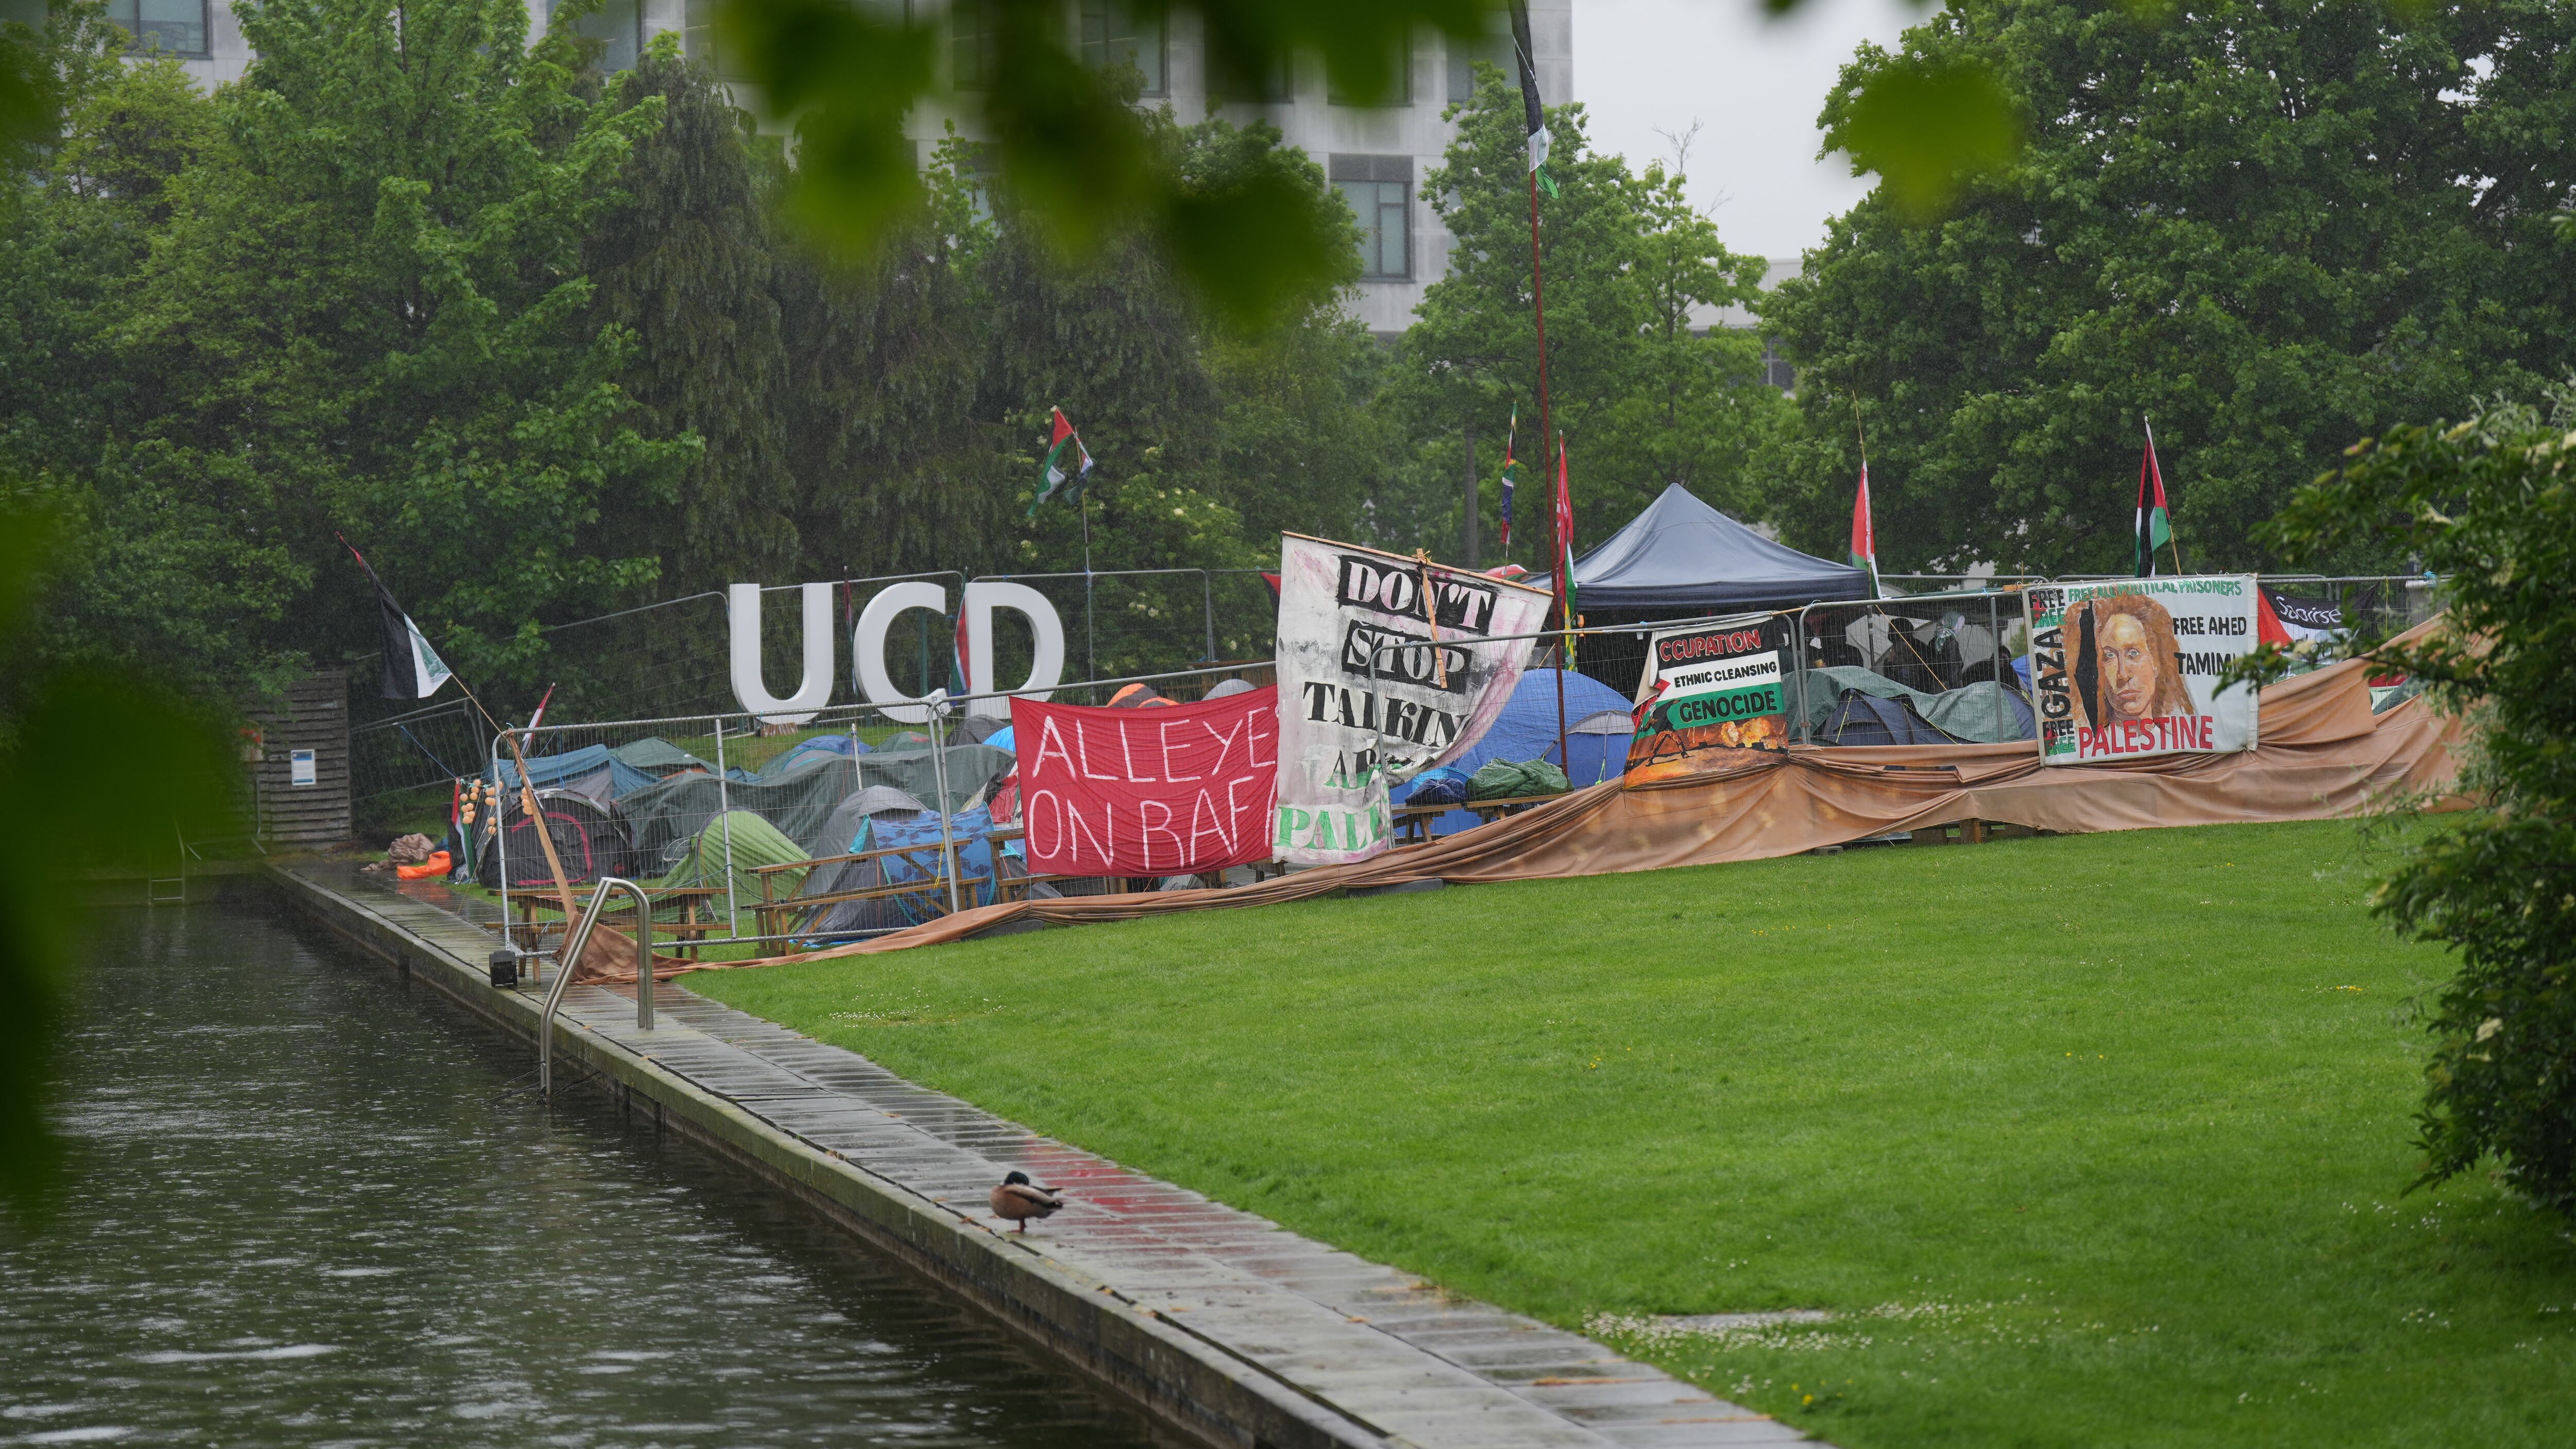 An encampment protest over the Gaza conflict on the grounds of University College Dublin